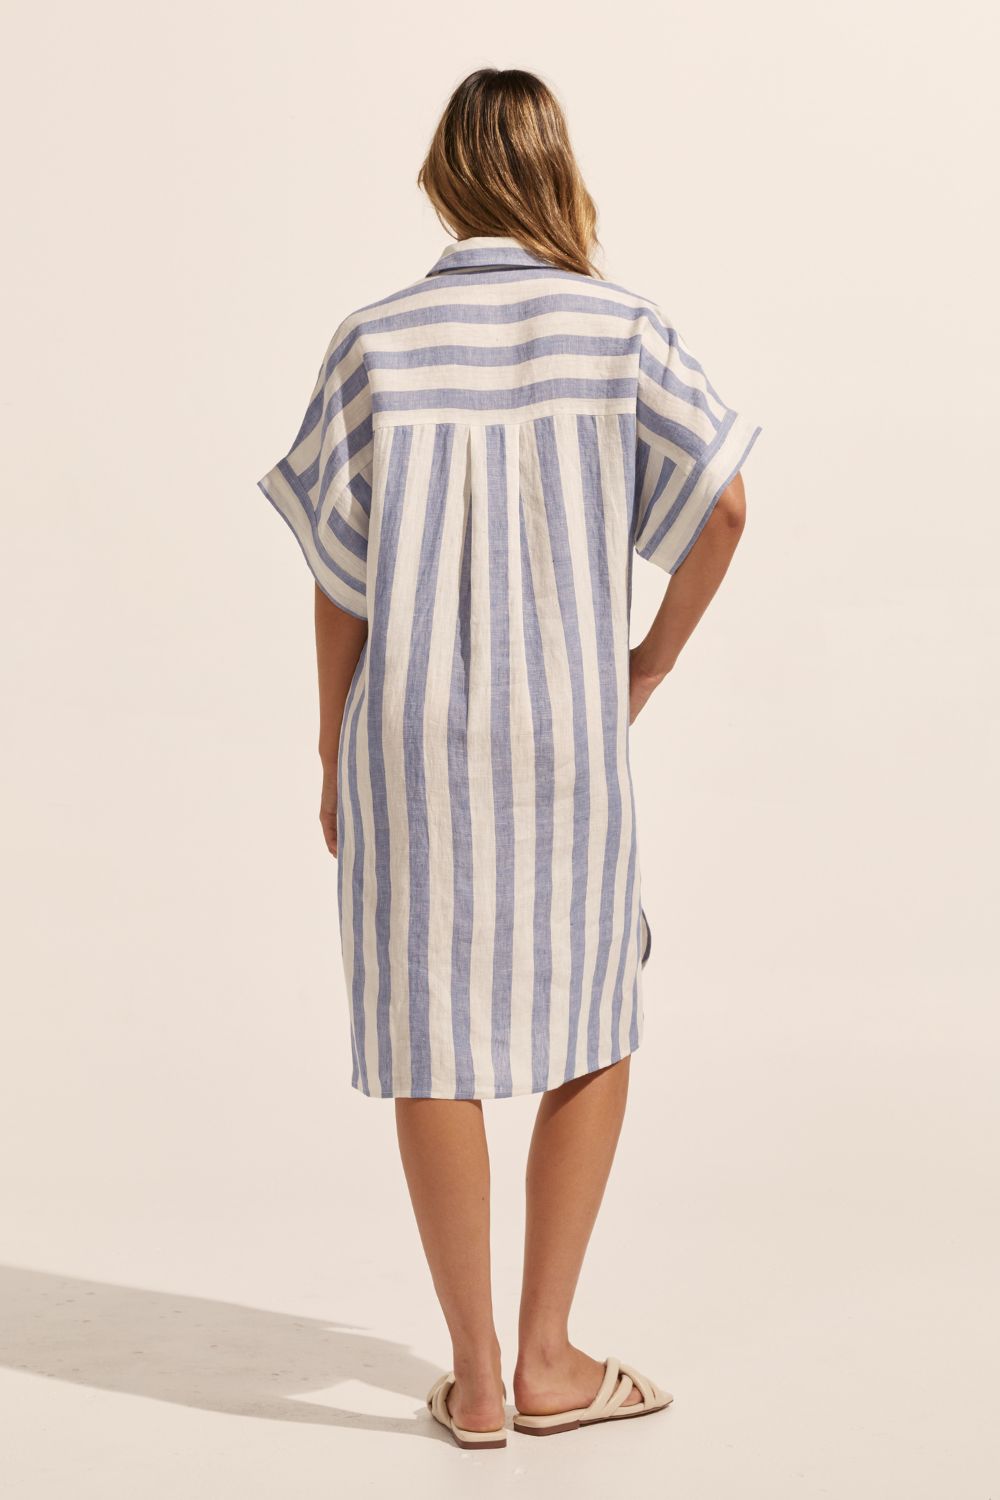 blue and white stripe, dress, mid length sleeves, oversized pockets, button down, collared dress, back image